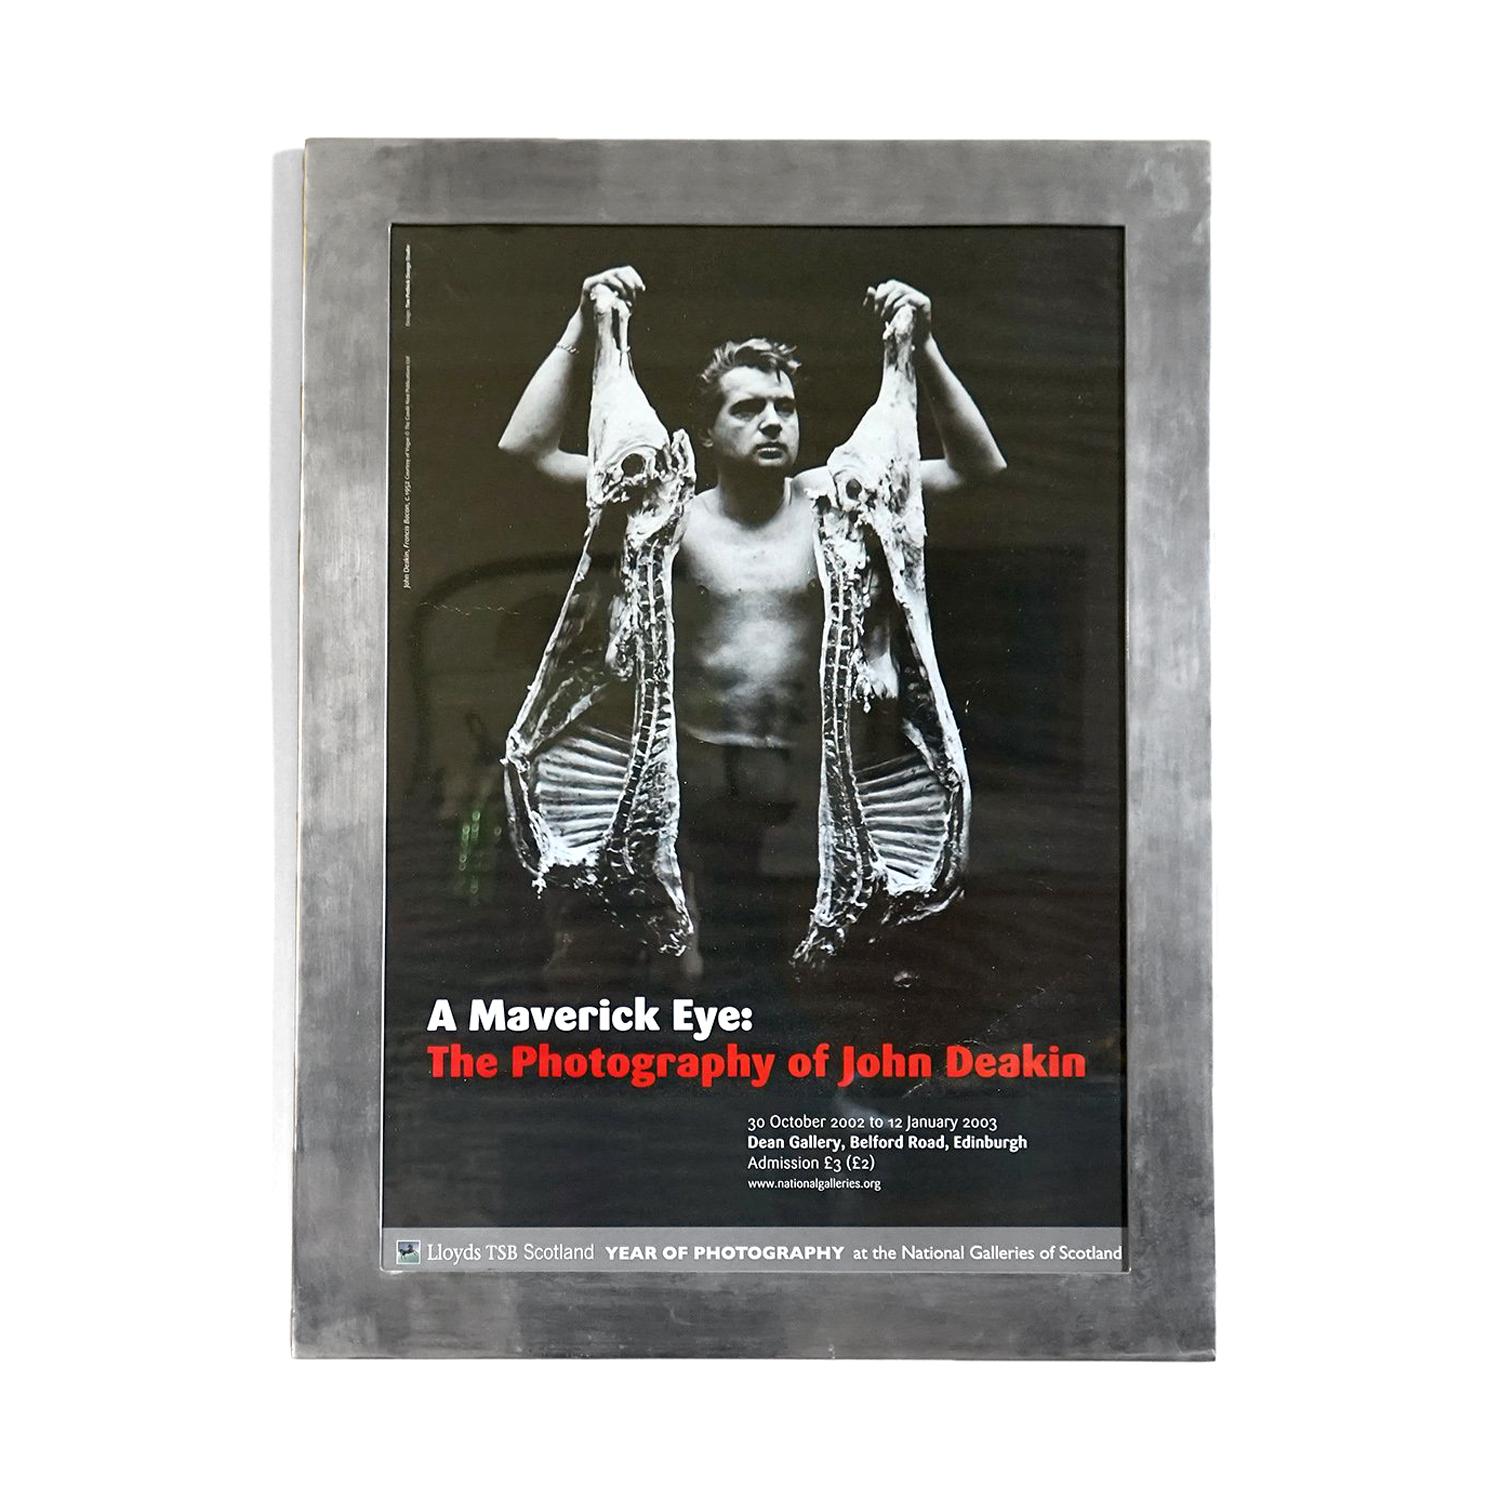 Vintage Framed Photography Print

An exhibition poster for John Deakin’s ‘A Maverick Eye’ in The Dean Gallery, Edinburgh.

Depicting one of Deakin’s most famous portraits, Francis Bacon originally shot for Vogue in the 1950s.

In a complementary and